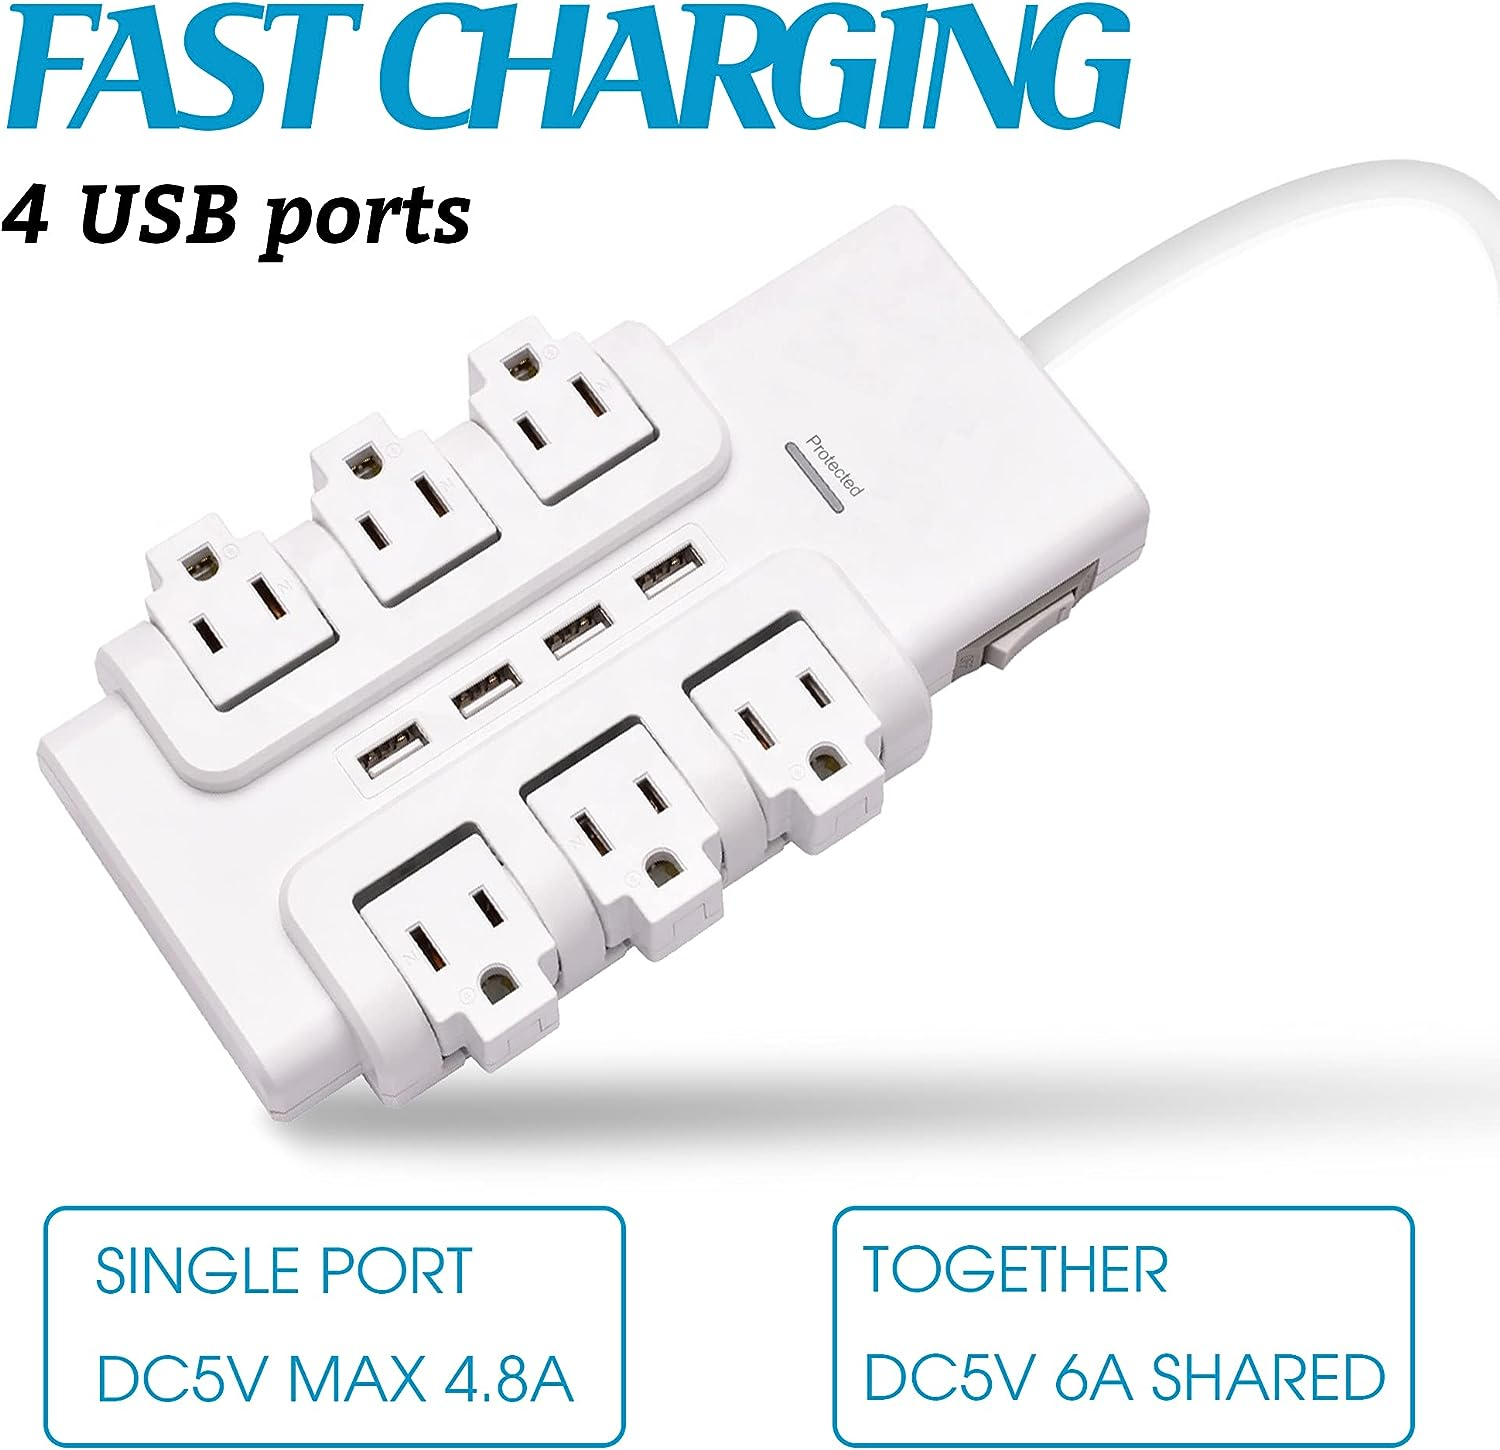 6 Outlets Extender Rotating Power Strip Surge Protector with 4 USB Ports and 6ft Heavy Duty Extension Cord Wall Mount for Home Office | karmasfar.com